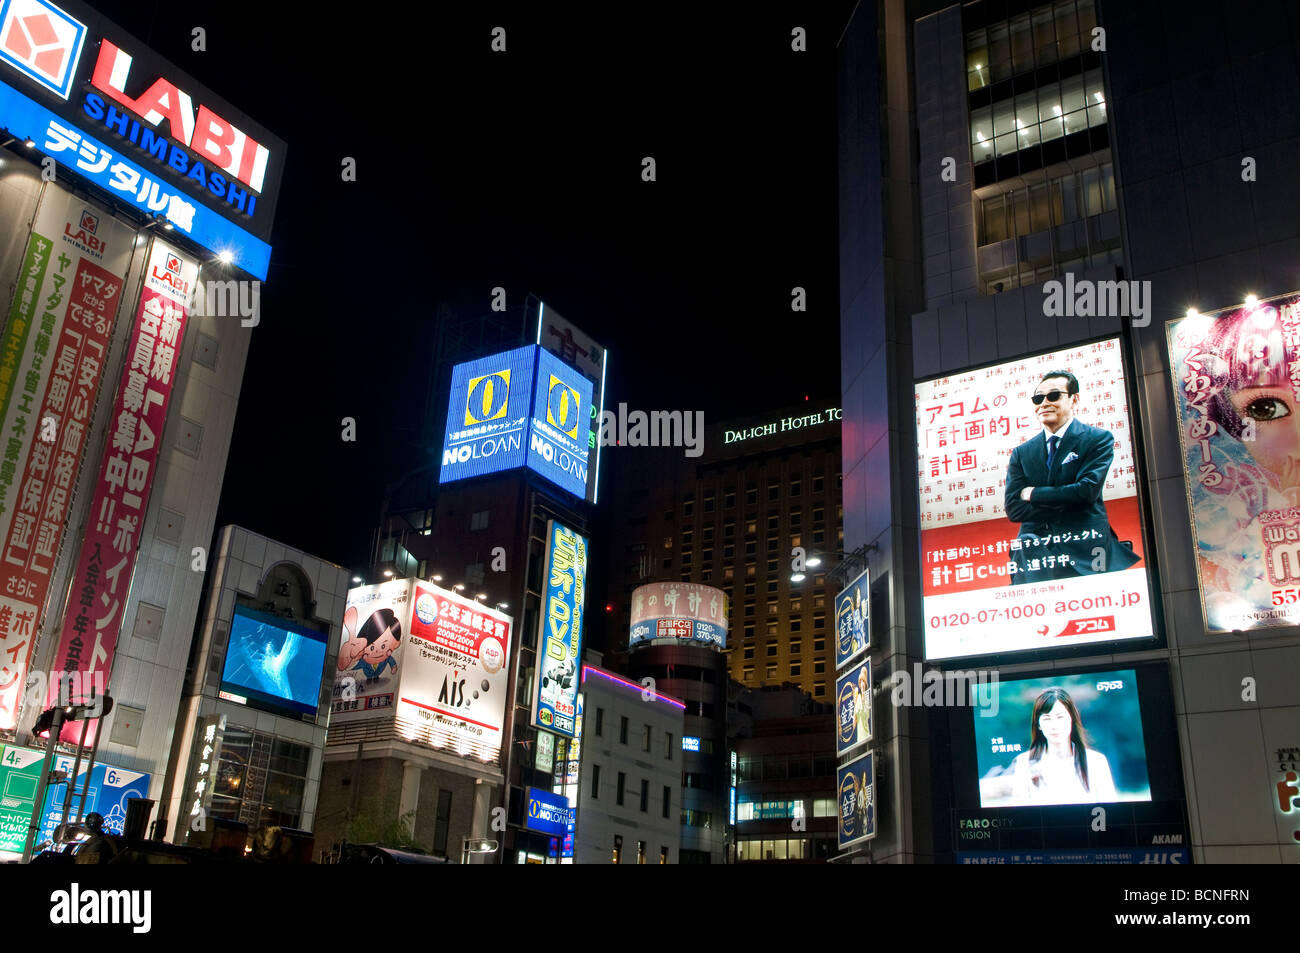 Neon lights and advertisement signs cover building facades in Shimbashi district Tokyo Japan Stock Photo